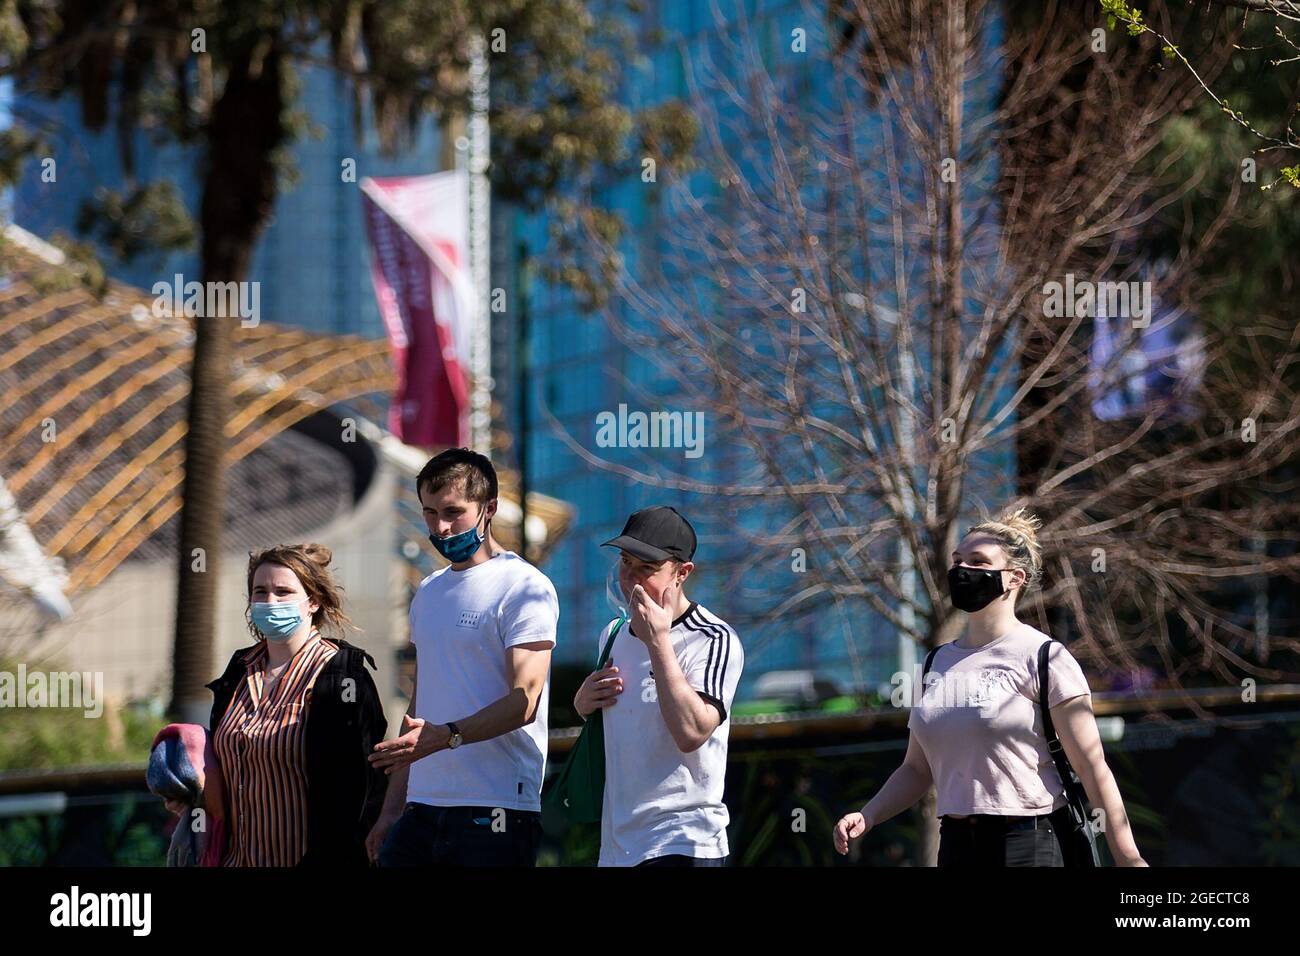 Melbourne, Australia, 29 August, 2020. A group of people are seen wearing masks but not physically distancing. Spring has arrived as Melbournians declare 'crisis' over as they venture out of their homes in huge numbers to enjoy the sun despite Premier Daniel Andrews pleading them to stay indoors during COVID-19 in Melbourne, Australia. Premier Daniel Andrews is said to have struck a deal with the cross benchers allowing his controversial plans for extending the State of Emergency for a further 12 months. This comes as new COVID-19 infections dropped below 100 for the first time since the secon Stock Photo